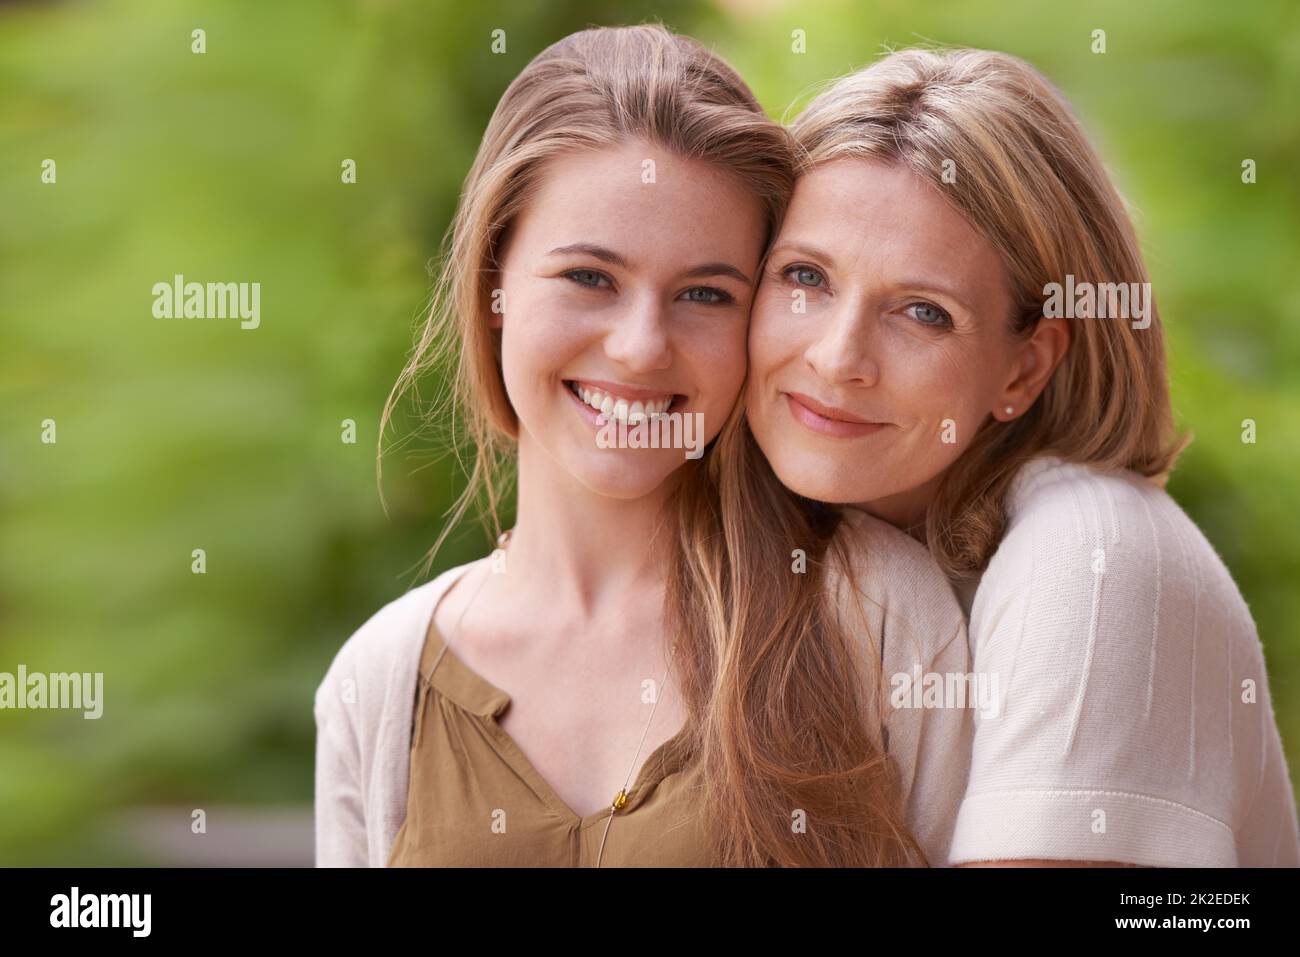 Theyve always been very close. Portrait of a mother embracing her daughter. Stock Photo